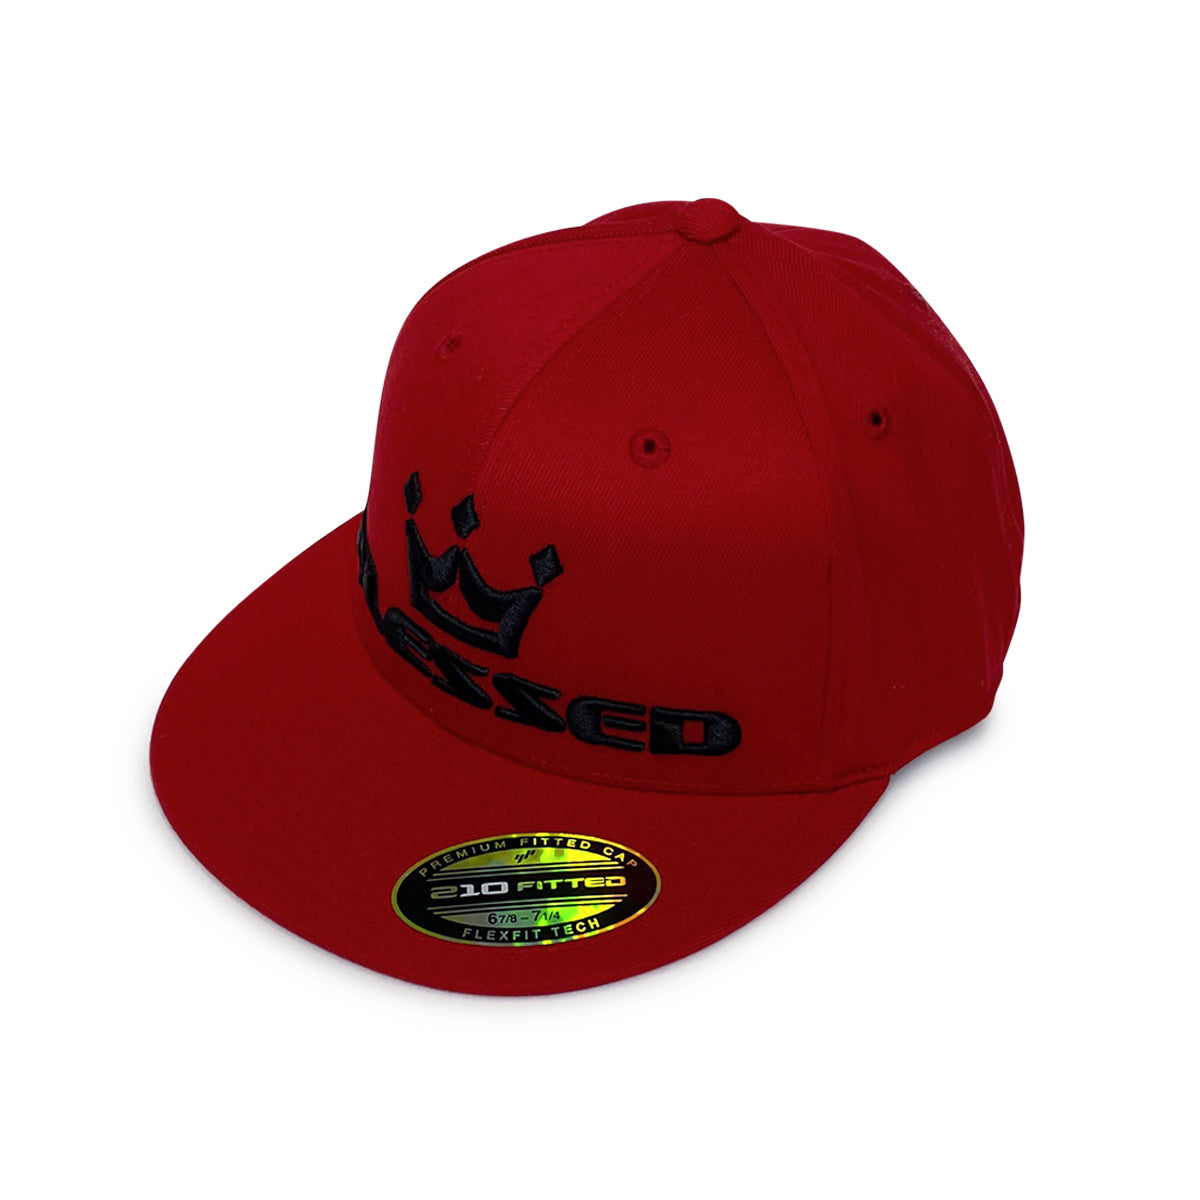 Fitted Blessed Hats Black On Red Solid / 6-7/8 - 7-1/4